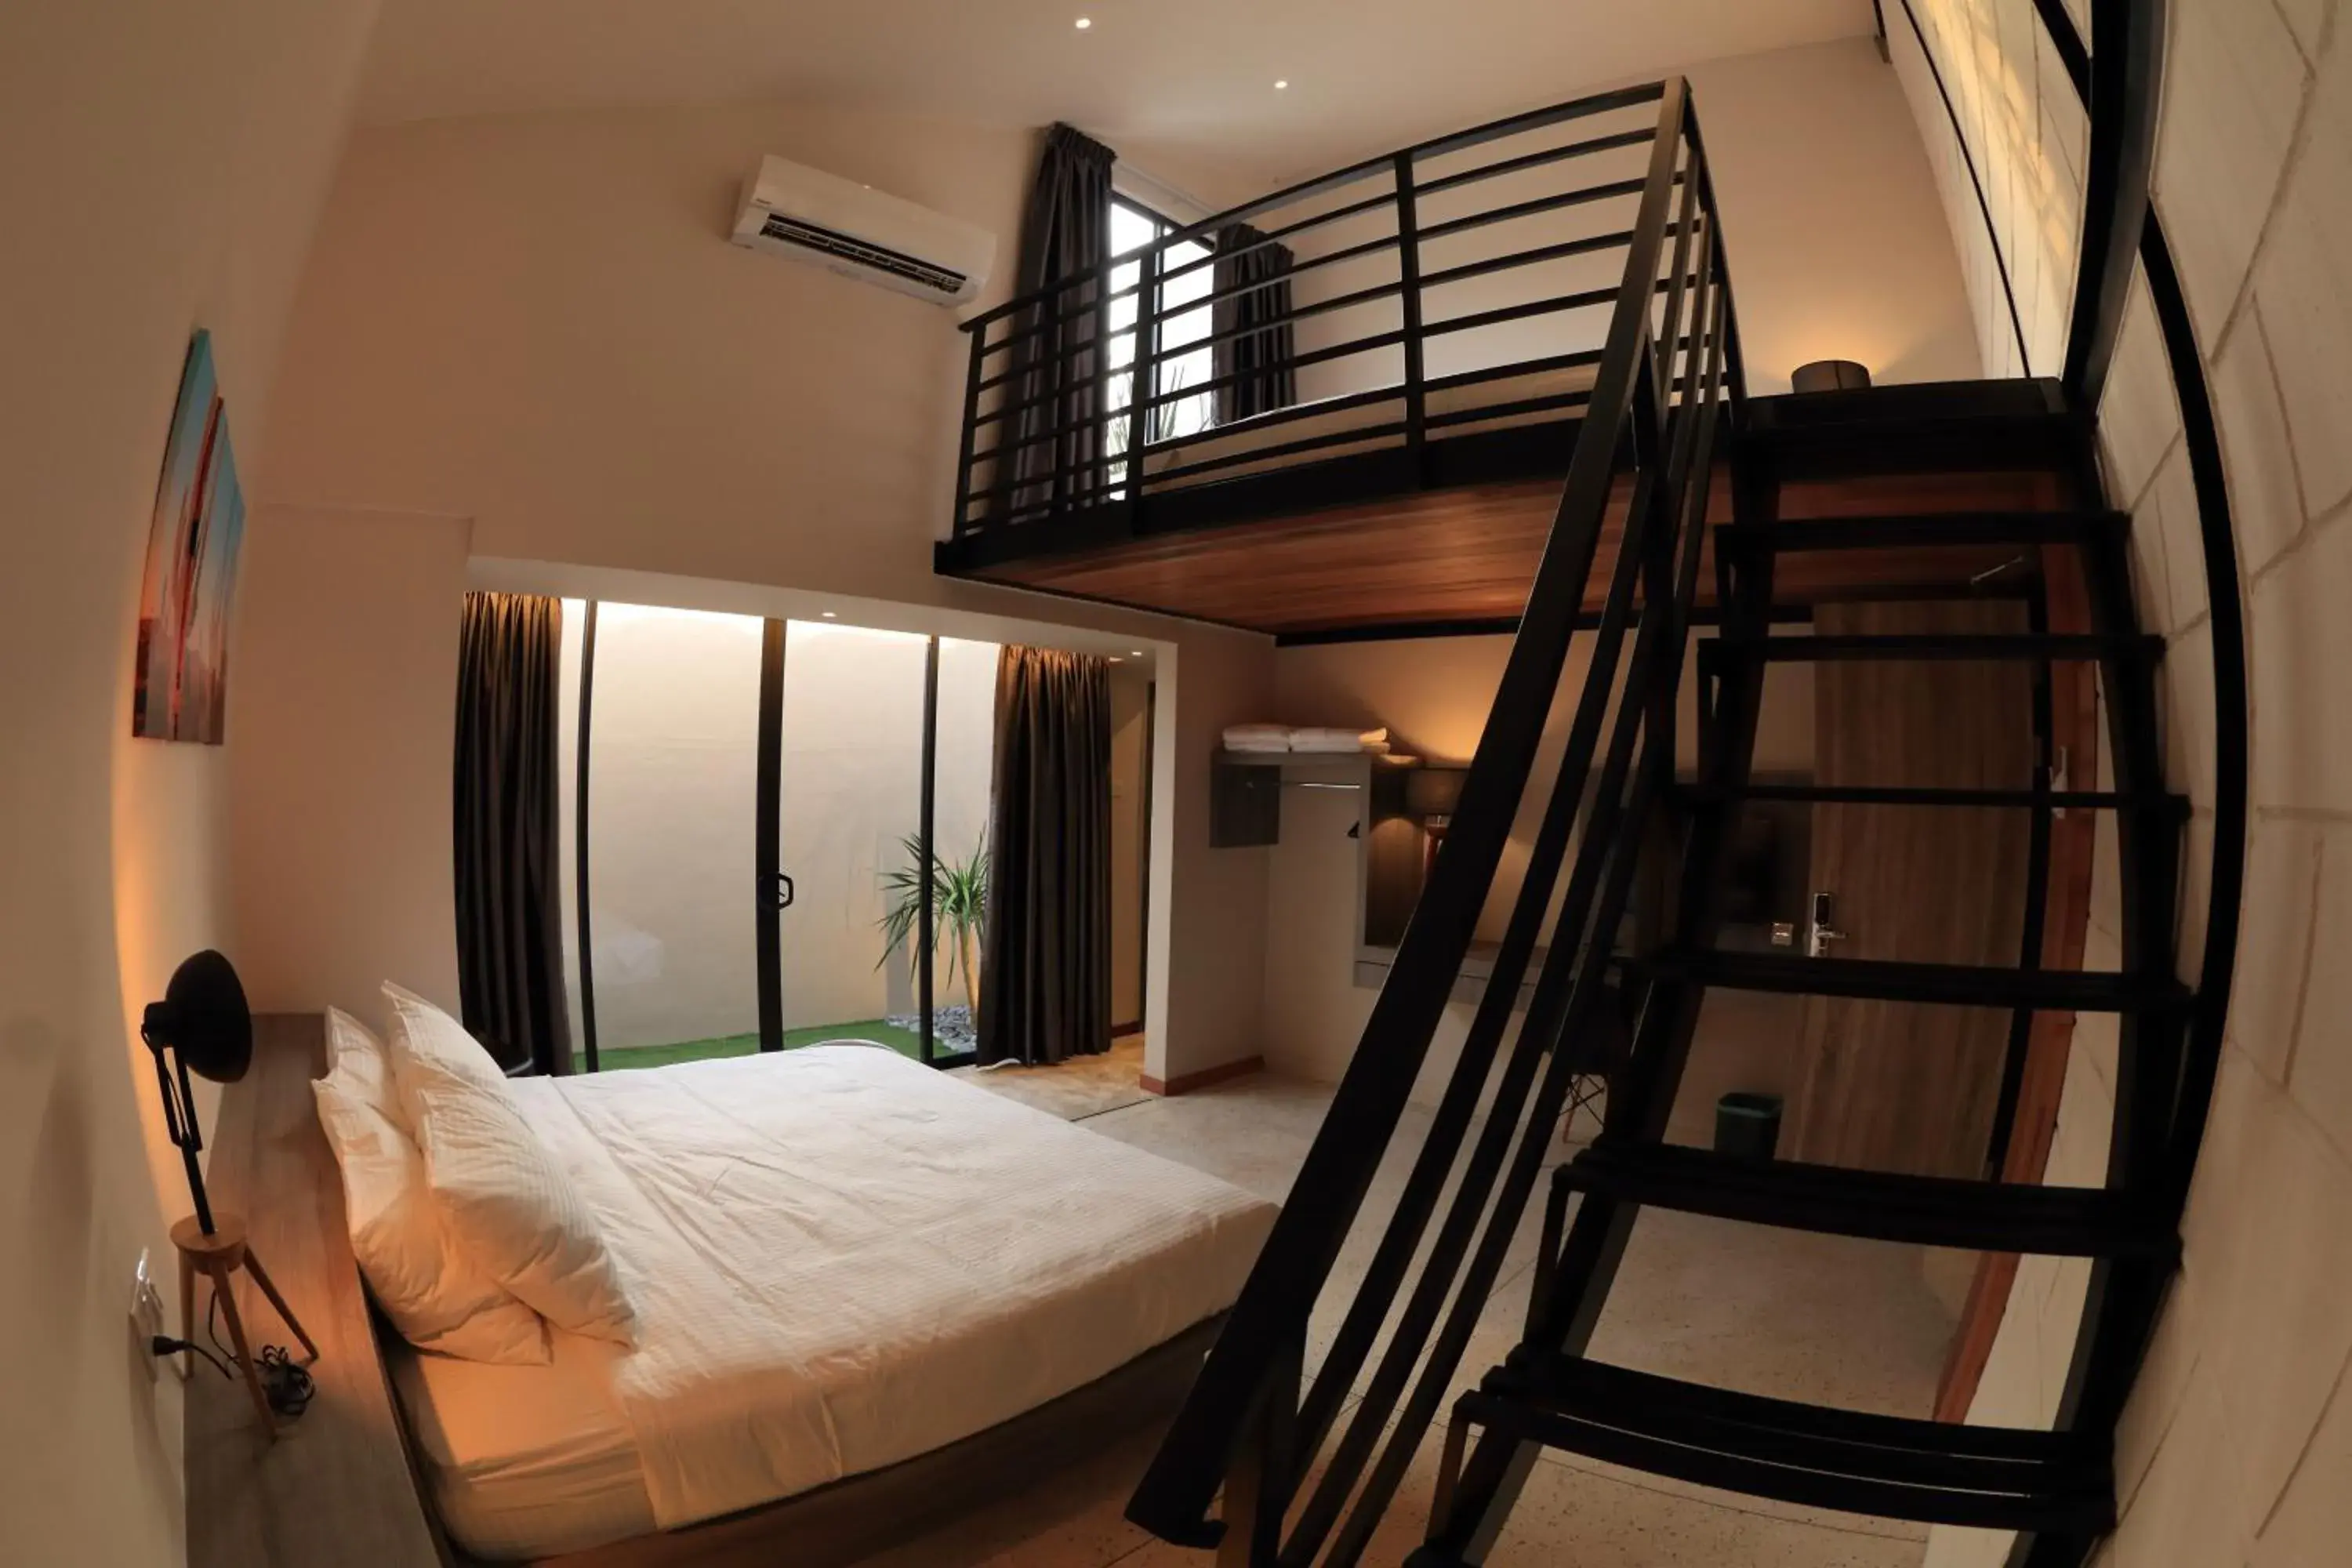 Room Photo in Laman Sentosa Boutique Residence